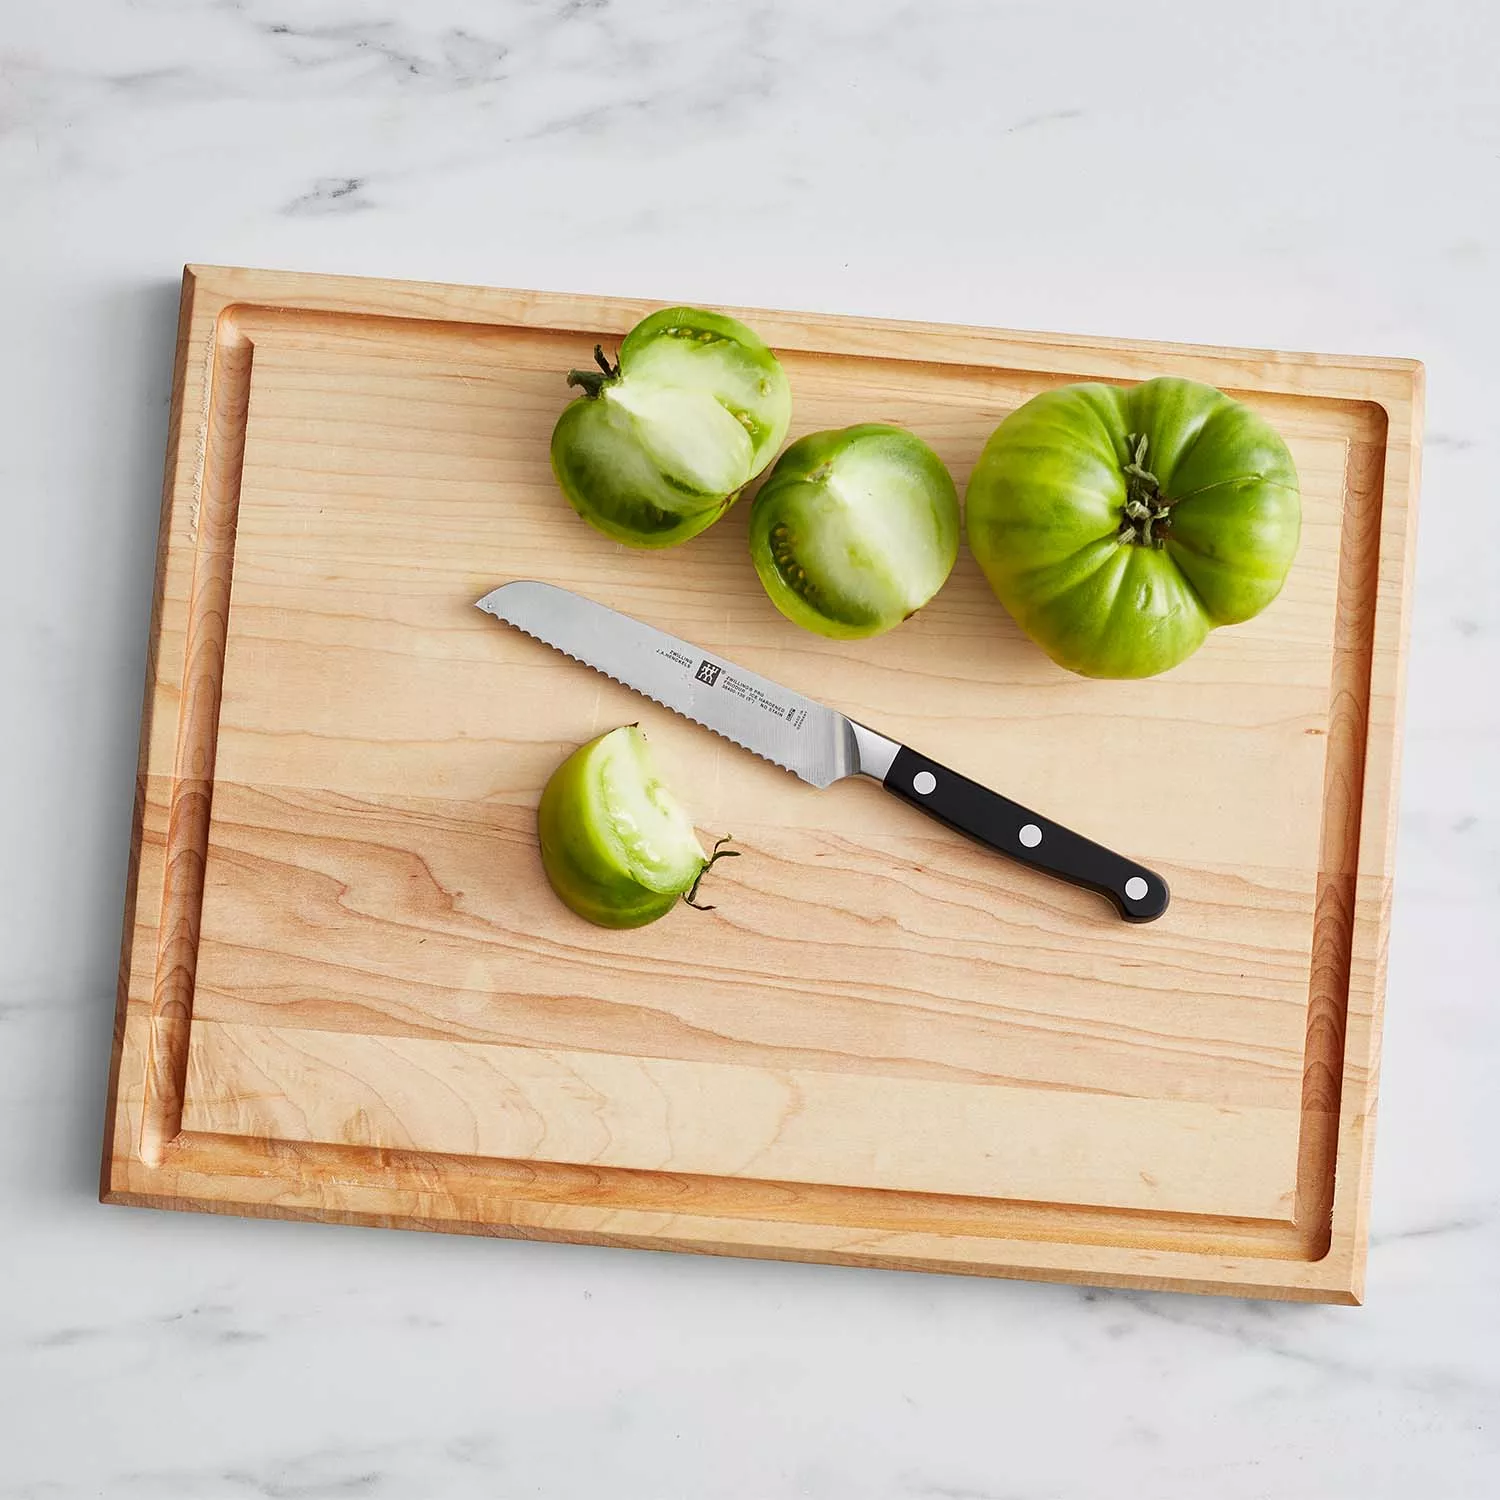 Superior Sinks 12.6-in L x 17.1-in W Wood Cutting Board at